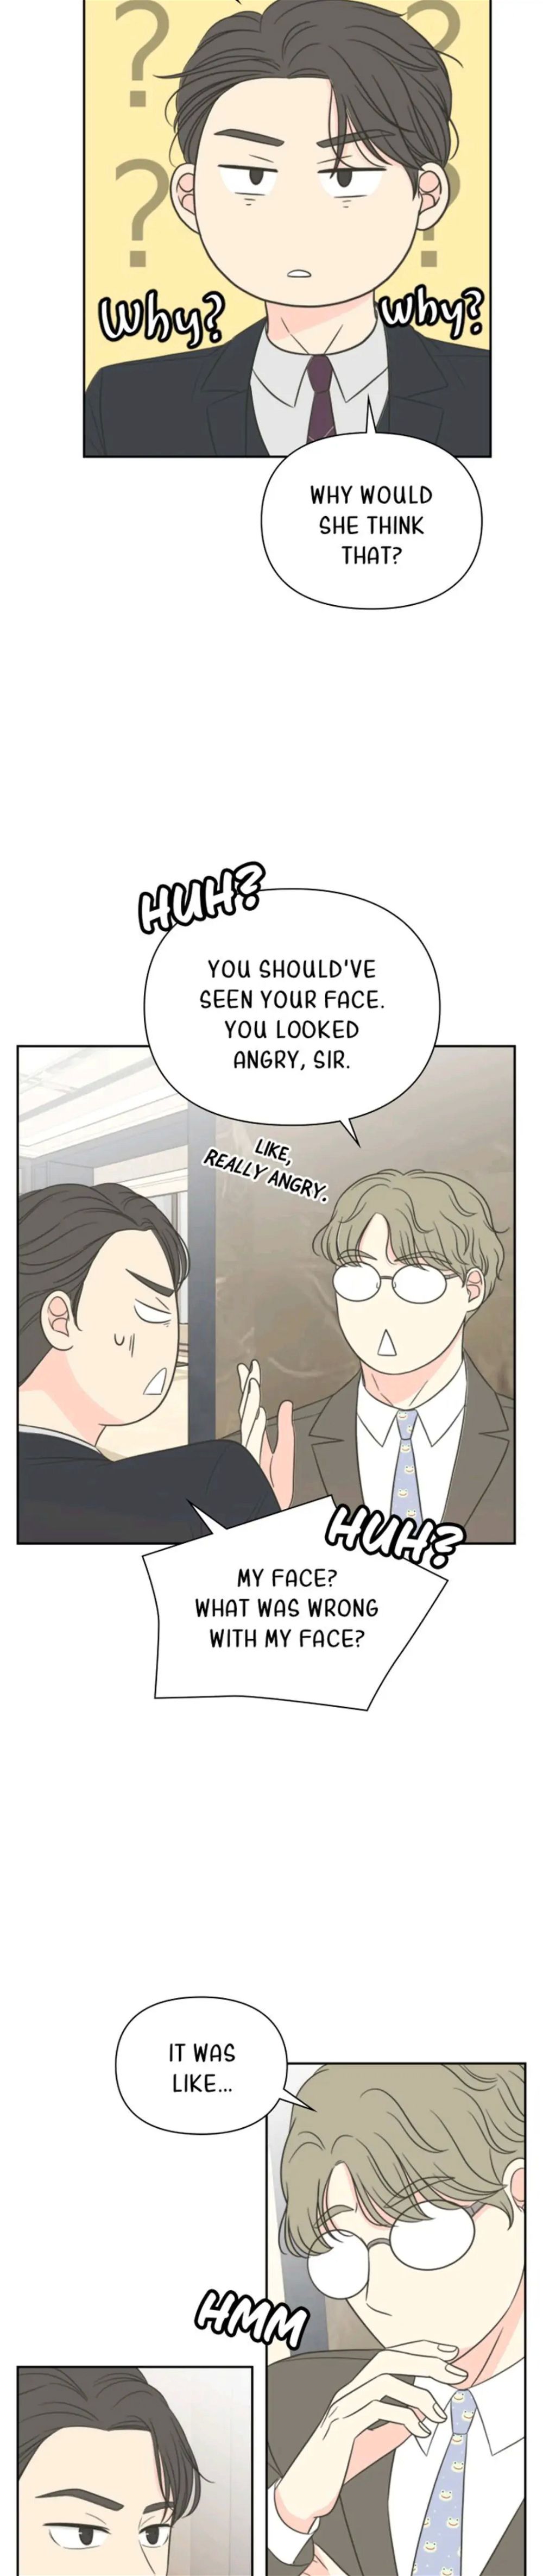 Check In to My Heart chapter 8 - Page 23